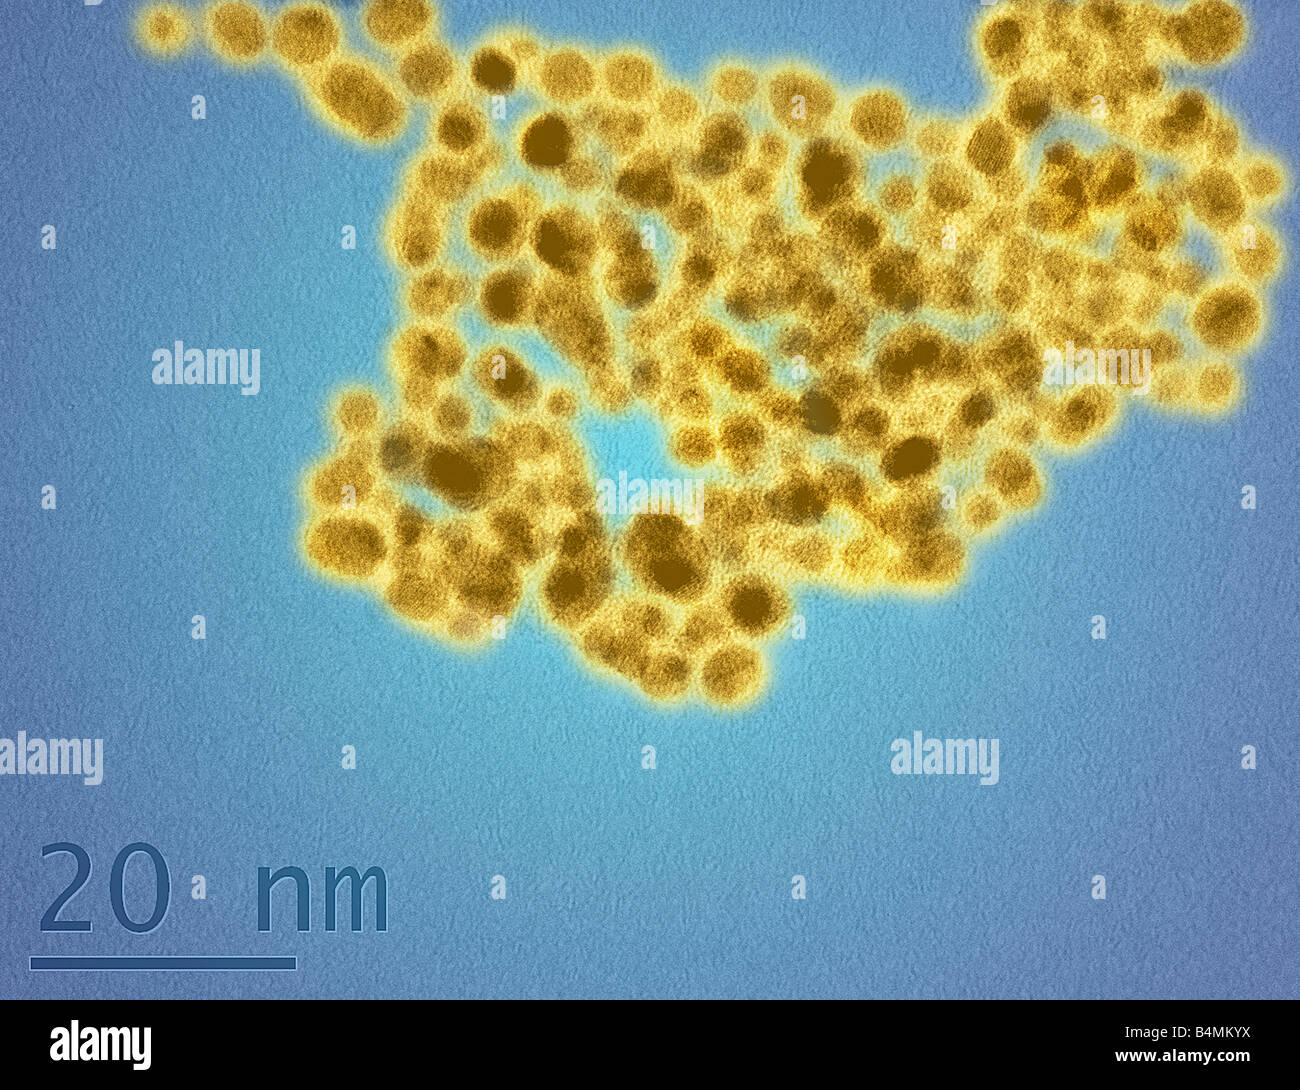 A TEM image of gold nanoparticles coating cells in a glutathione surface corona illustrating the molecular size of nanoparticles Stock Photo